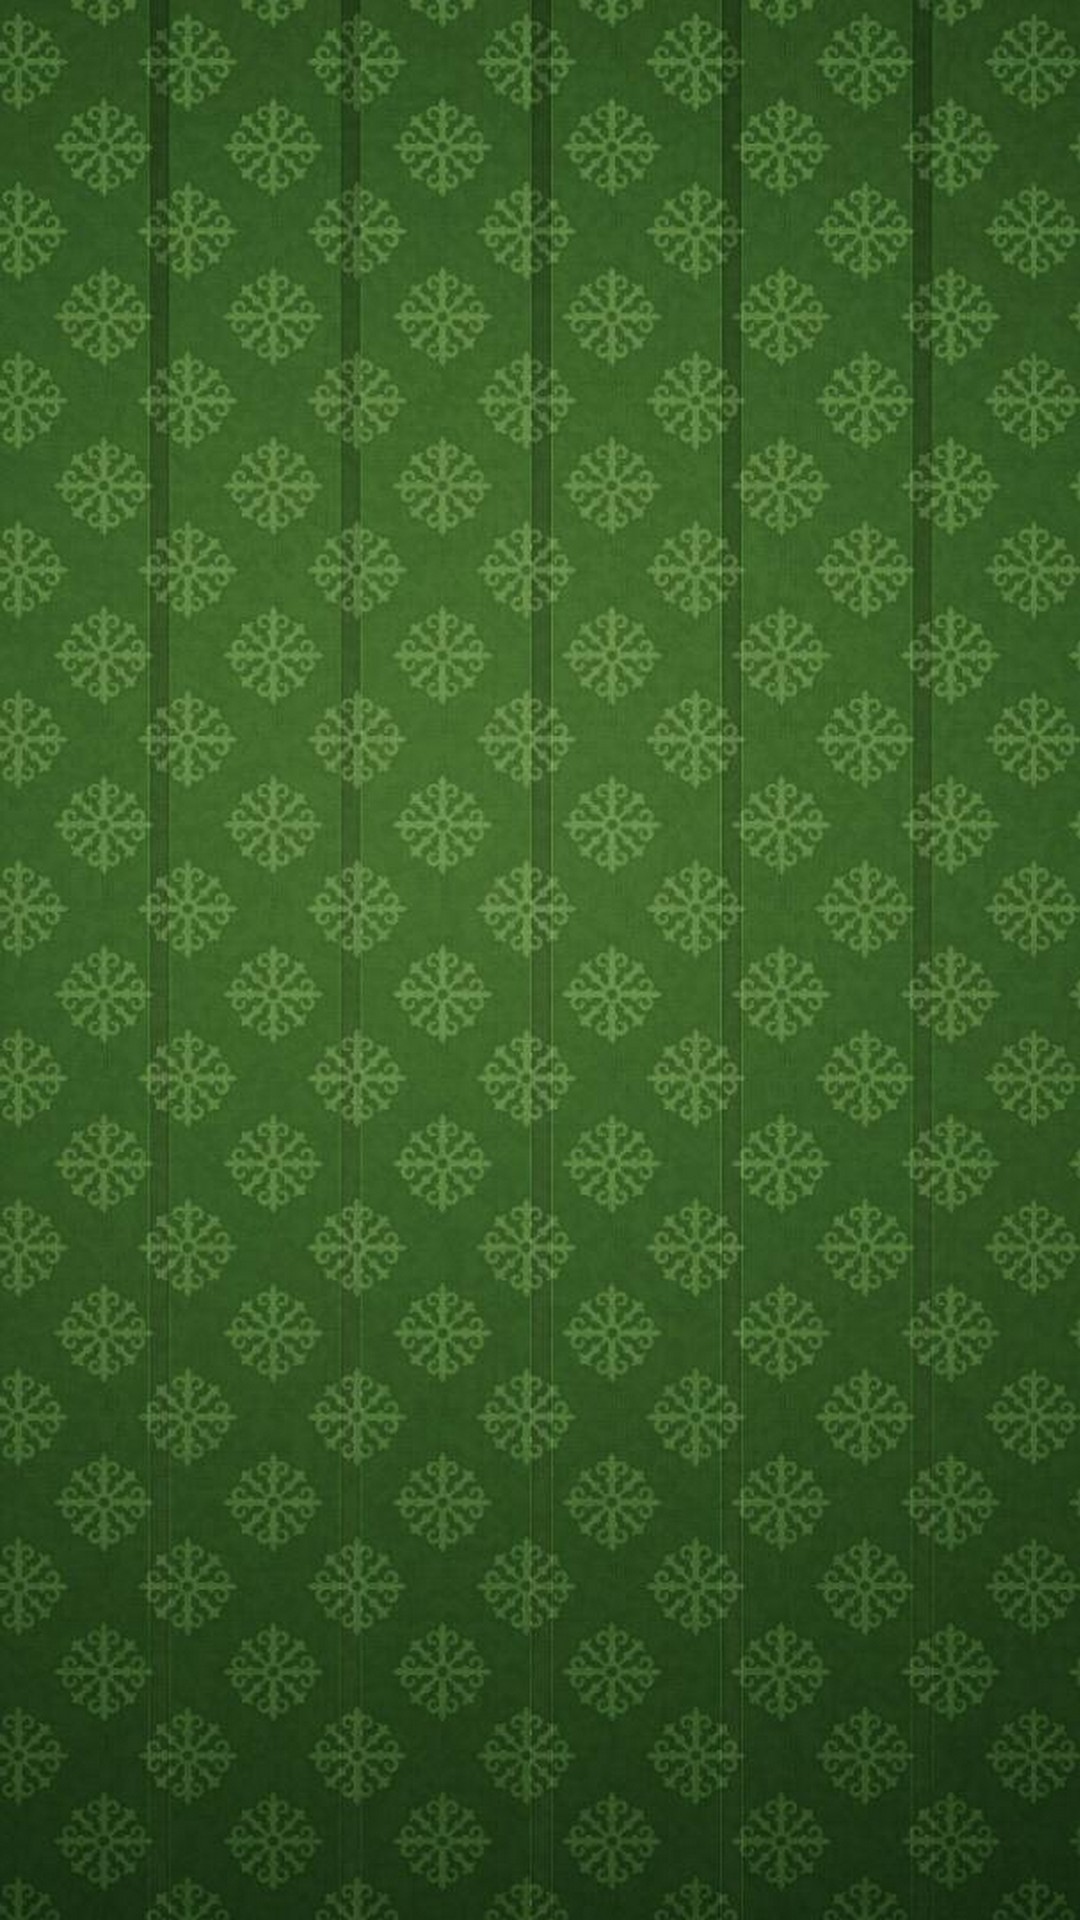 Android Wallpaper Hd Dark Green With Image Resolution - Dark Green Mobile Wallpaper Hd - HD Wallpaper 